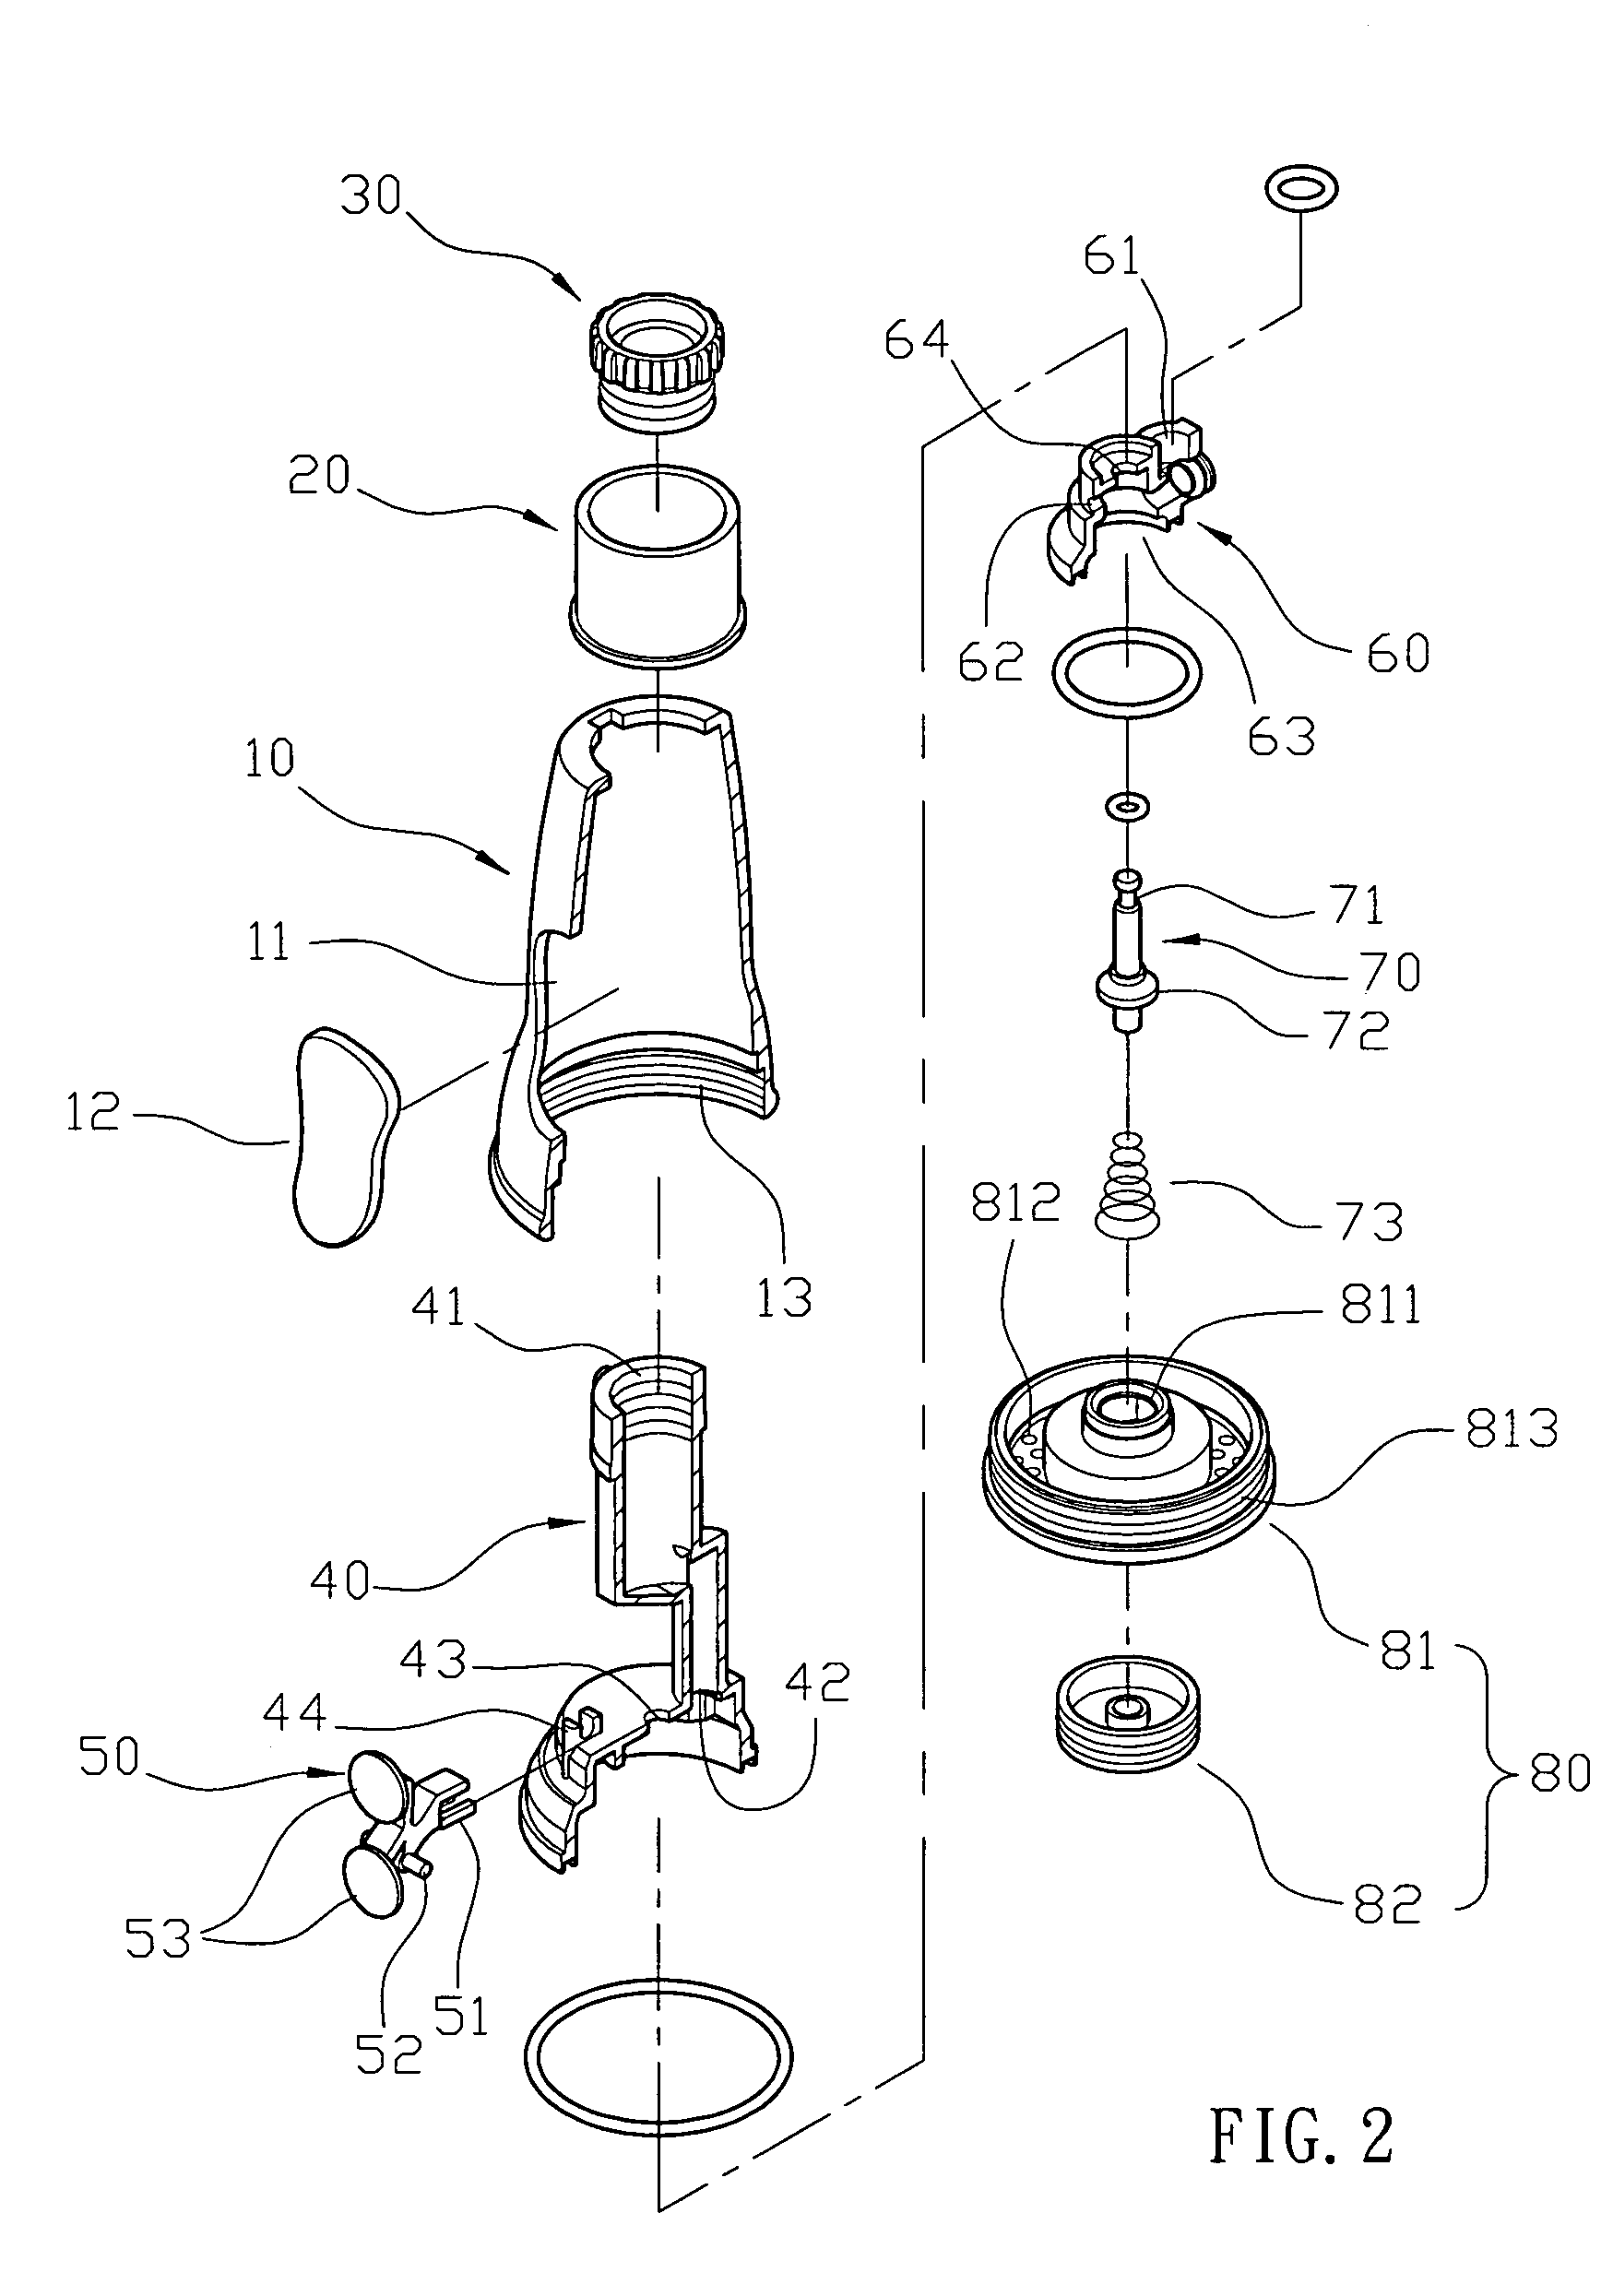 Water sprayer having two water output manners